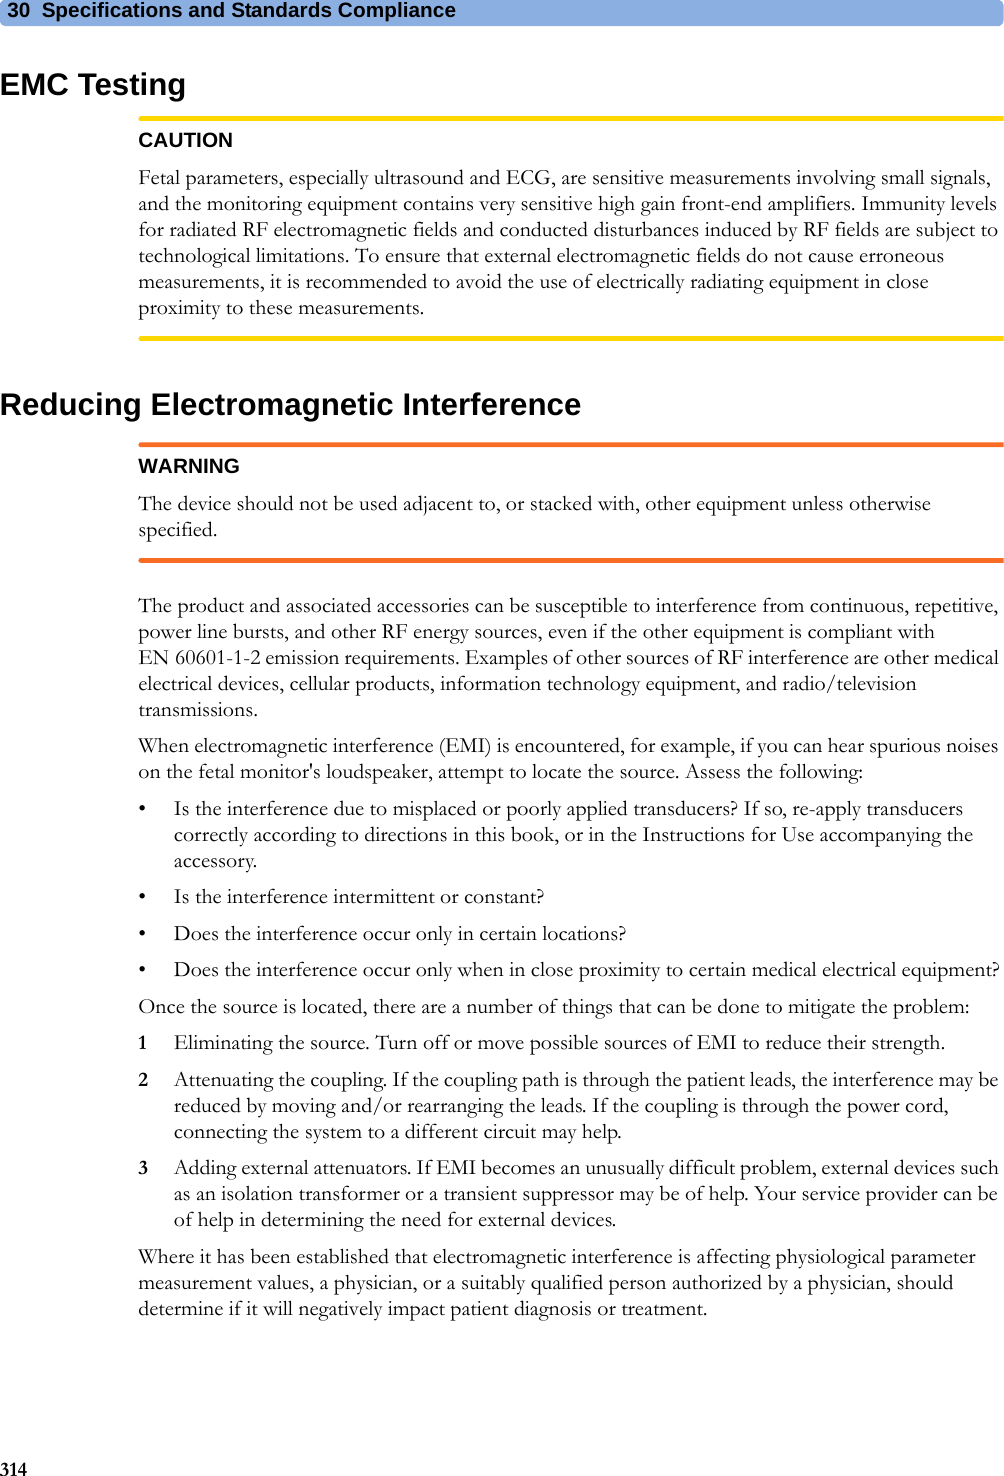 30  Specifications and Standards Compliance314EMC TestingCAUTIONFetal parameters, especially ultrasound and ECG, are sensitive measurements involving small signals, and the monitoring equipment contains very sensitive high gain front-end amplifiers. Immunity levels for radiated RF electromagnetic fields and conducted disturbances induced by RF fields are subject to technological limitations. To ensure that external electromagnetic fields do not cause erroneous measurements, it is recommended to avoid the use of electrically radiating equipment in close proximity to these measurements.Reducing Electromagnetic InterferenceWARNINGThe device should not be used adjacent to, or stacked with, other equipment unless otherwise specified.The product and associated accessories can be susceptible to interference from continuous, repetitive, power line bursts, and other RF energy sources, even if the other equipment is compliant with EN 60601-1-2 emission requirements. Examples of other sources of RF interference are other medical electrical devices, cellular products, information technology equipment, and radio/television transmissions.When electromagnetic interference (EMI) is encountered, for example, if you can hear spurious noises on the fetal monitor&apos;s loudspeaker, attempt to locate the source. Assess the following:• Is the interference due to misplaced or poorly applied transducers? If so, re-apply transducers correctly according to directions in this book, or in the Instructions for Use accompanying the accessory.• Is the interference intermittent or constant?• Does the interference occur only in certain locations?• Does the interference occur only when in close proximity to certain medical electrical equipment?Once the source is located, there are a number of things that can be done to mitigate the problem:1Eliminating the source. Turn off or move possible sources of EMI to reduce their strength.2Attenuating the coupling. If the coupling path is through the patient leads, the interference may be reduced by moving and/or rearranging the leads. If the coupling is through the power cord, connecting the system to a different circuit may help.3Adding external attenuators. If EMI becomes an unusually difficult problem, external devices such as an isolation transformer or a transient suppressor may be of help. Your service provider can be of help in determining the need for external devices.Where it has been established that electromagnetic interference is affecting physiological parameter measurement values, a physician, or a suitably qualified person authorized by a physician, should determine if it will negatively impact patient diagnosis or treatment.